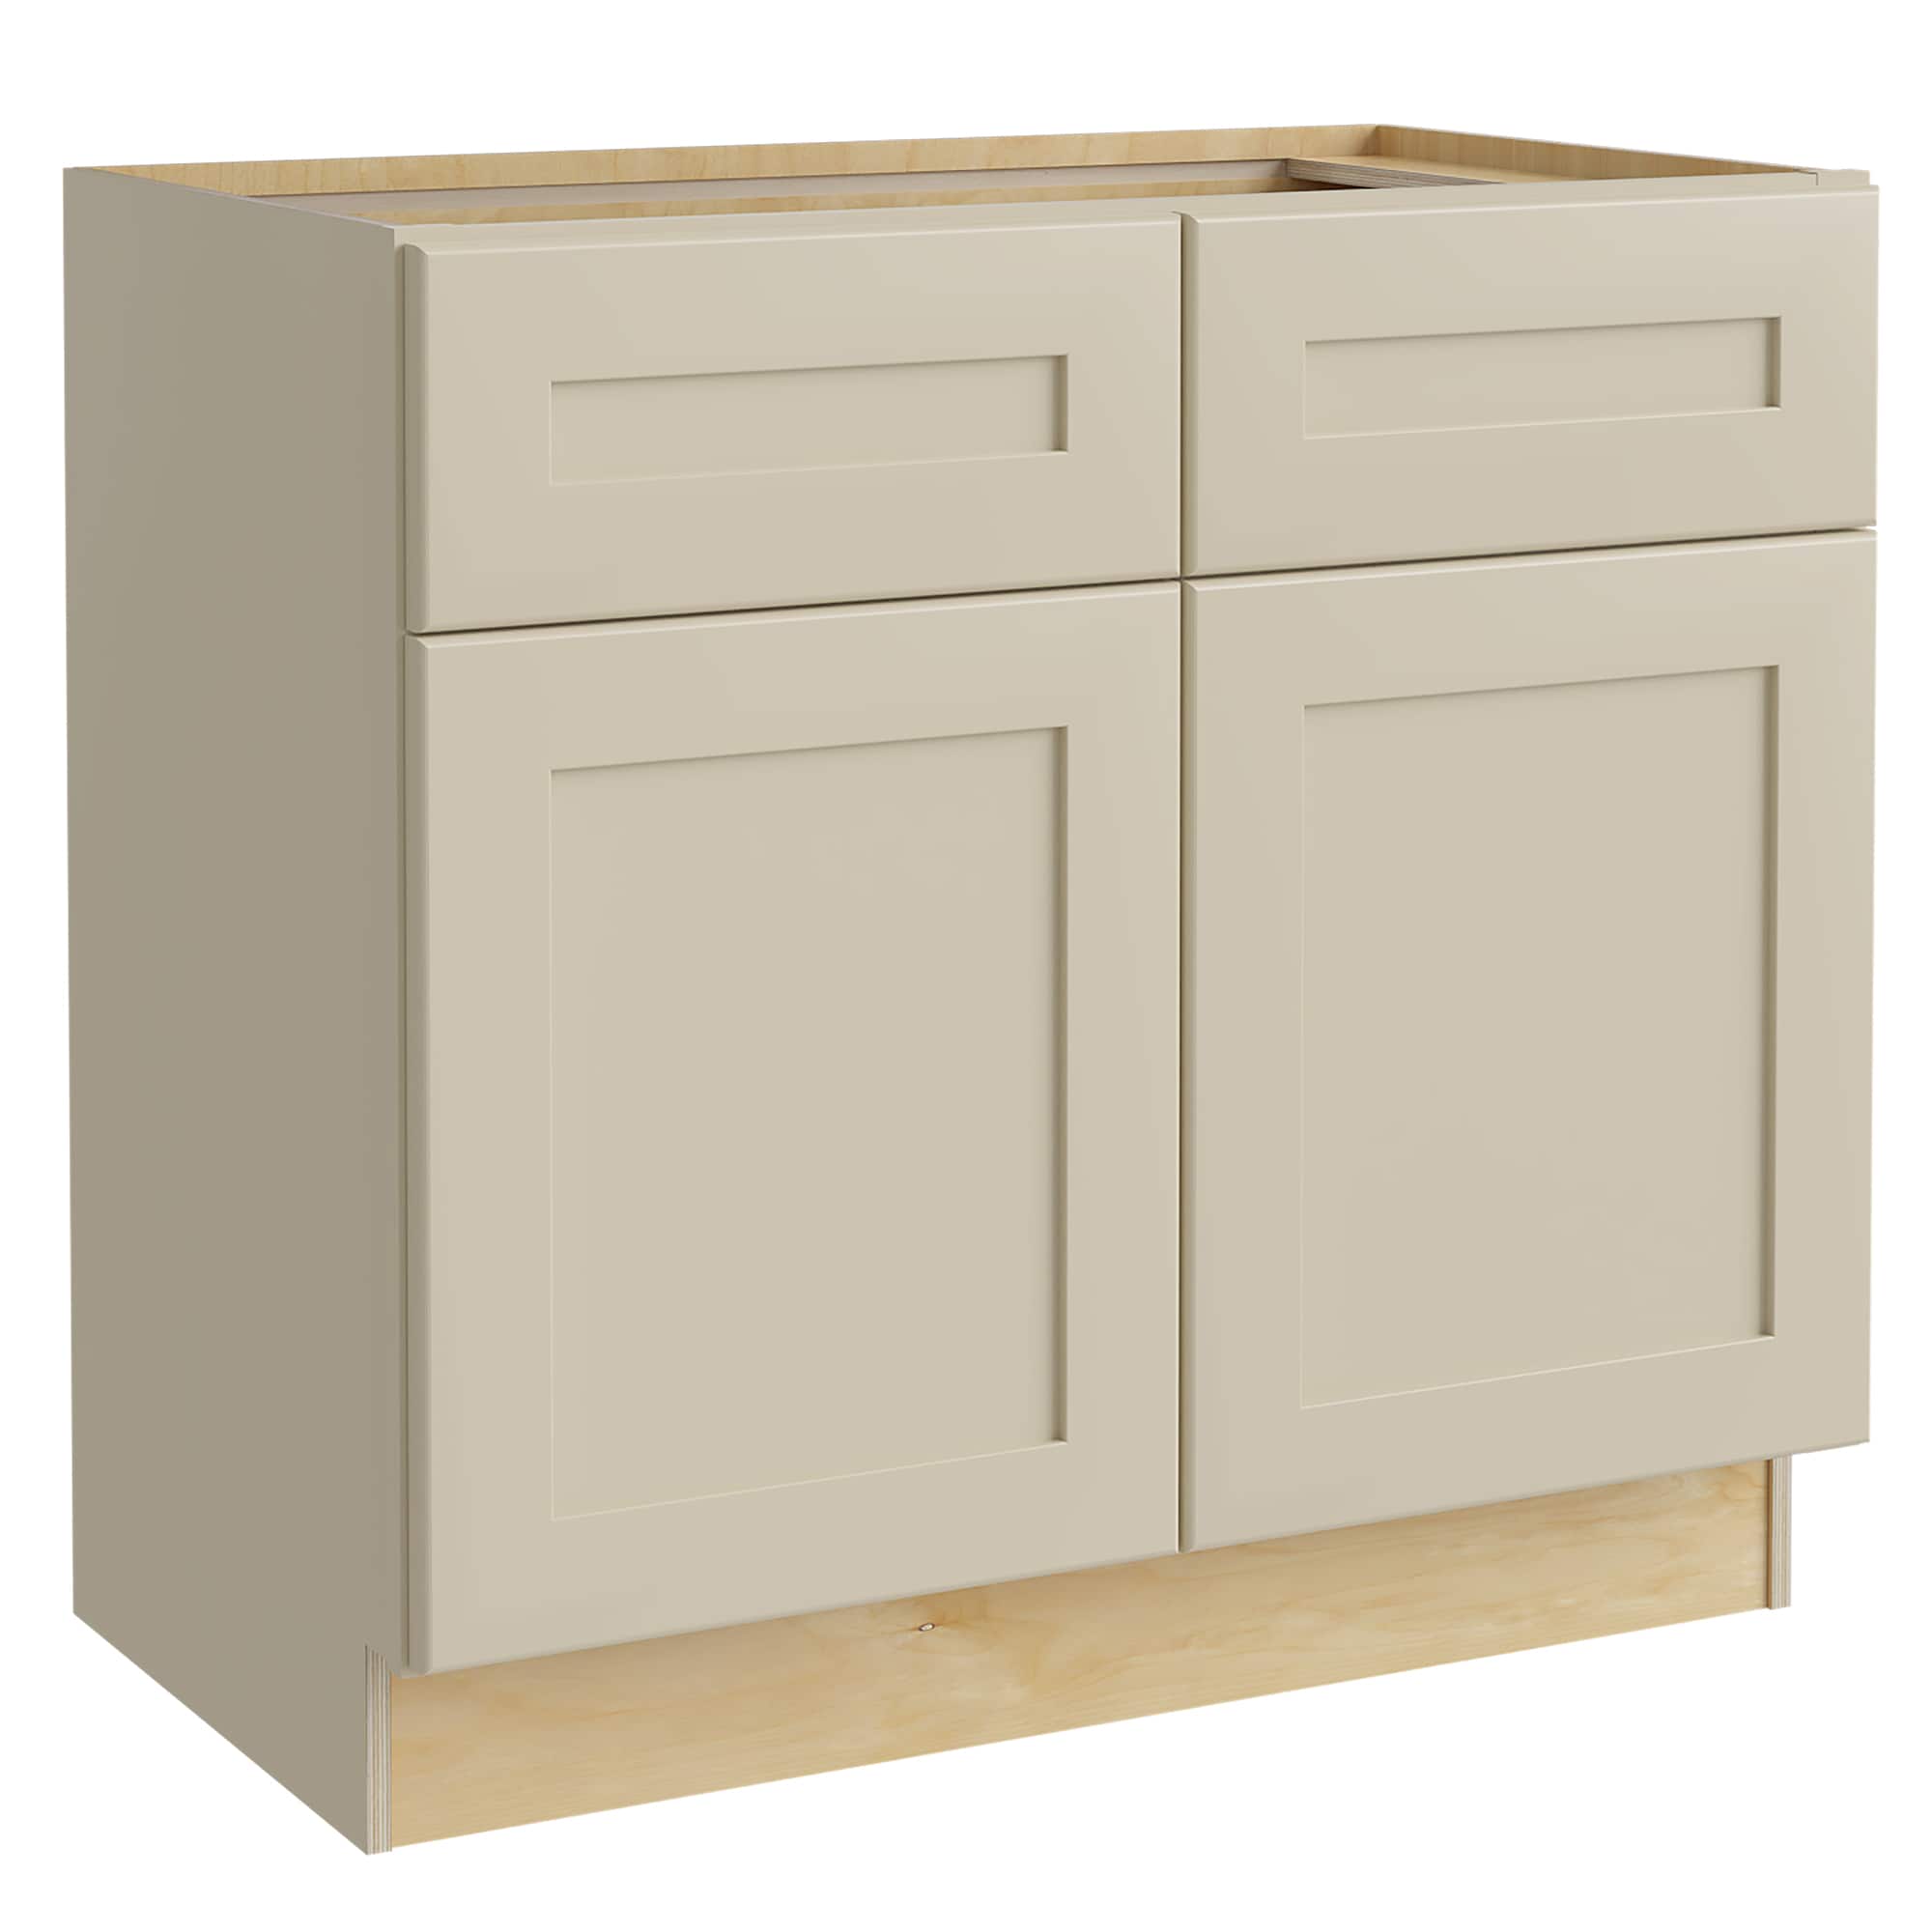 Luxxe Cabinetry 33-in W x 34.5-in H x 21-in D Norfolk Blended Cream Painted Drawer Base Fully Assembled Semi-custom Cabinet in Off-White | VB3321-NBC